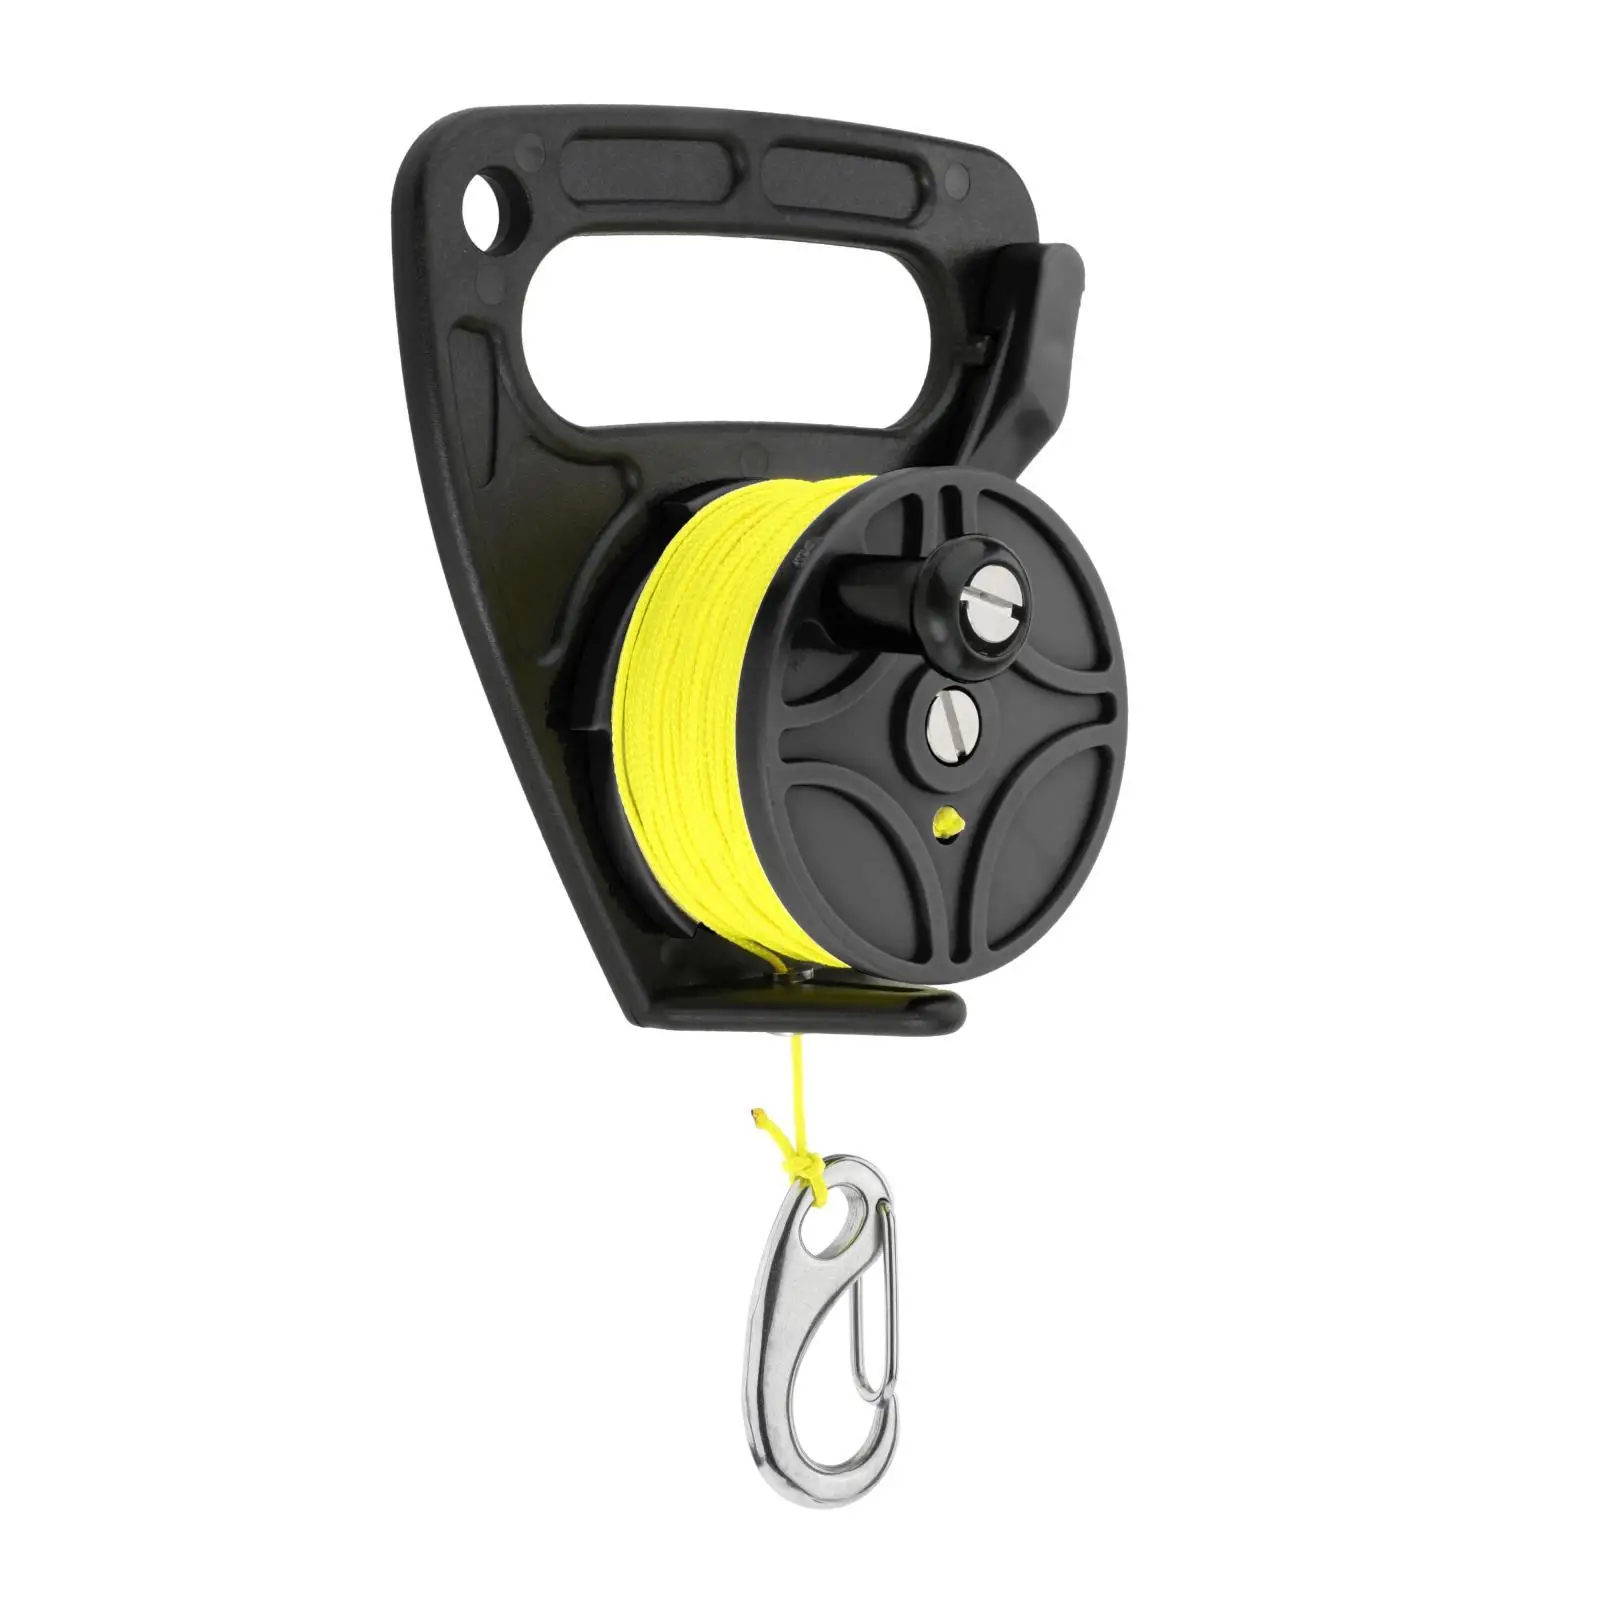 Multi-Purpose Scuba Diving Reel with Handle Equipment for Wreck Exploration Spear Fishing